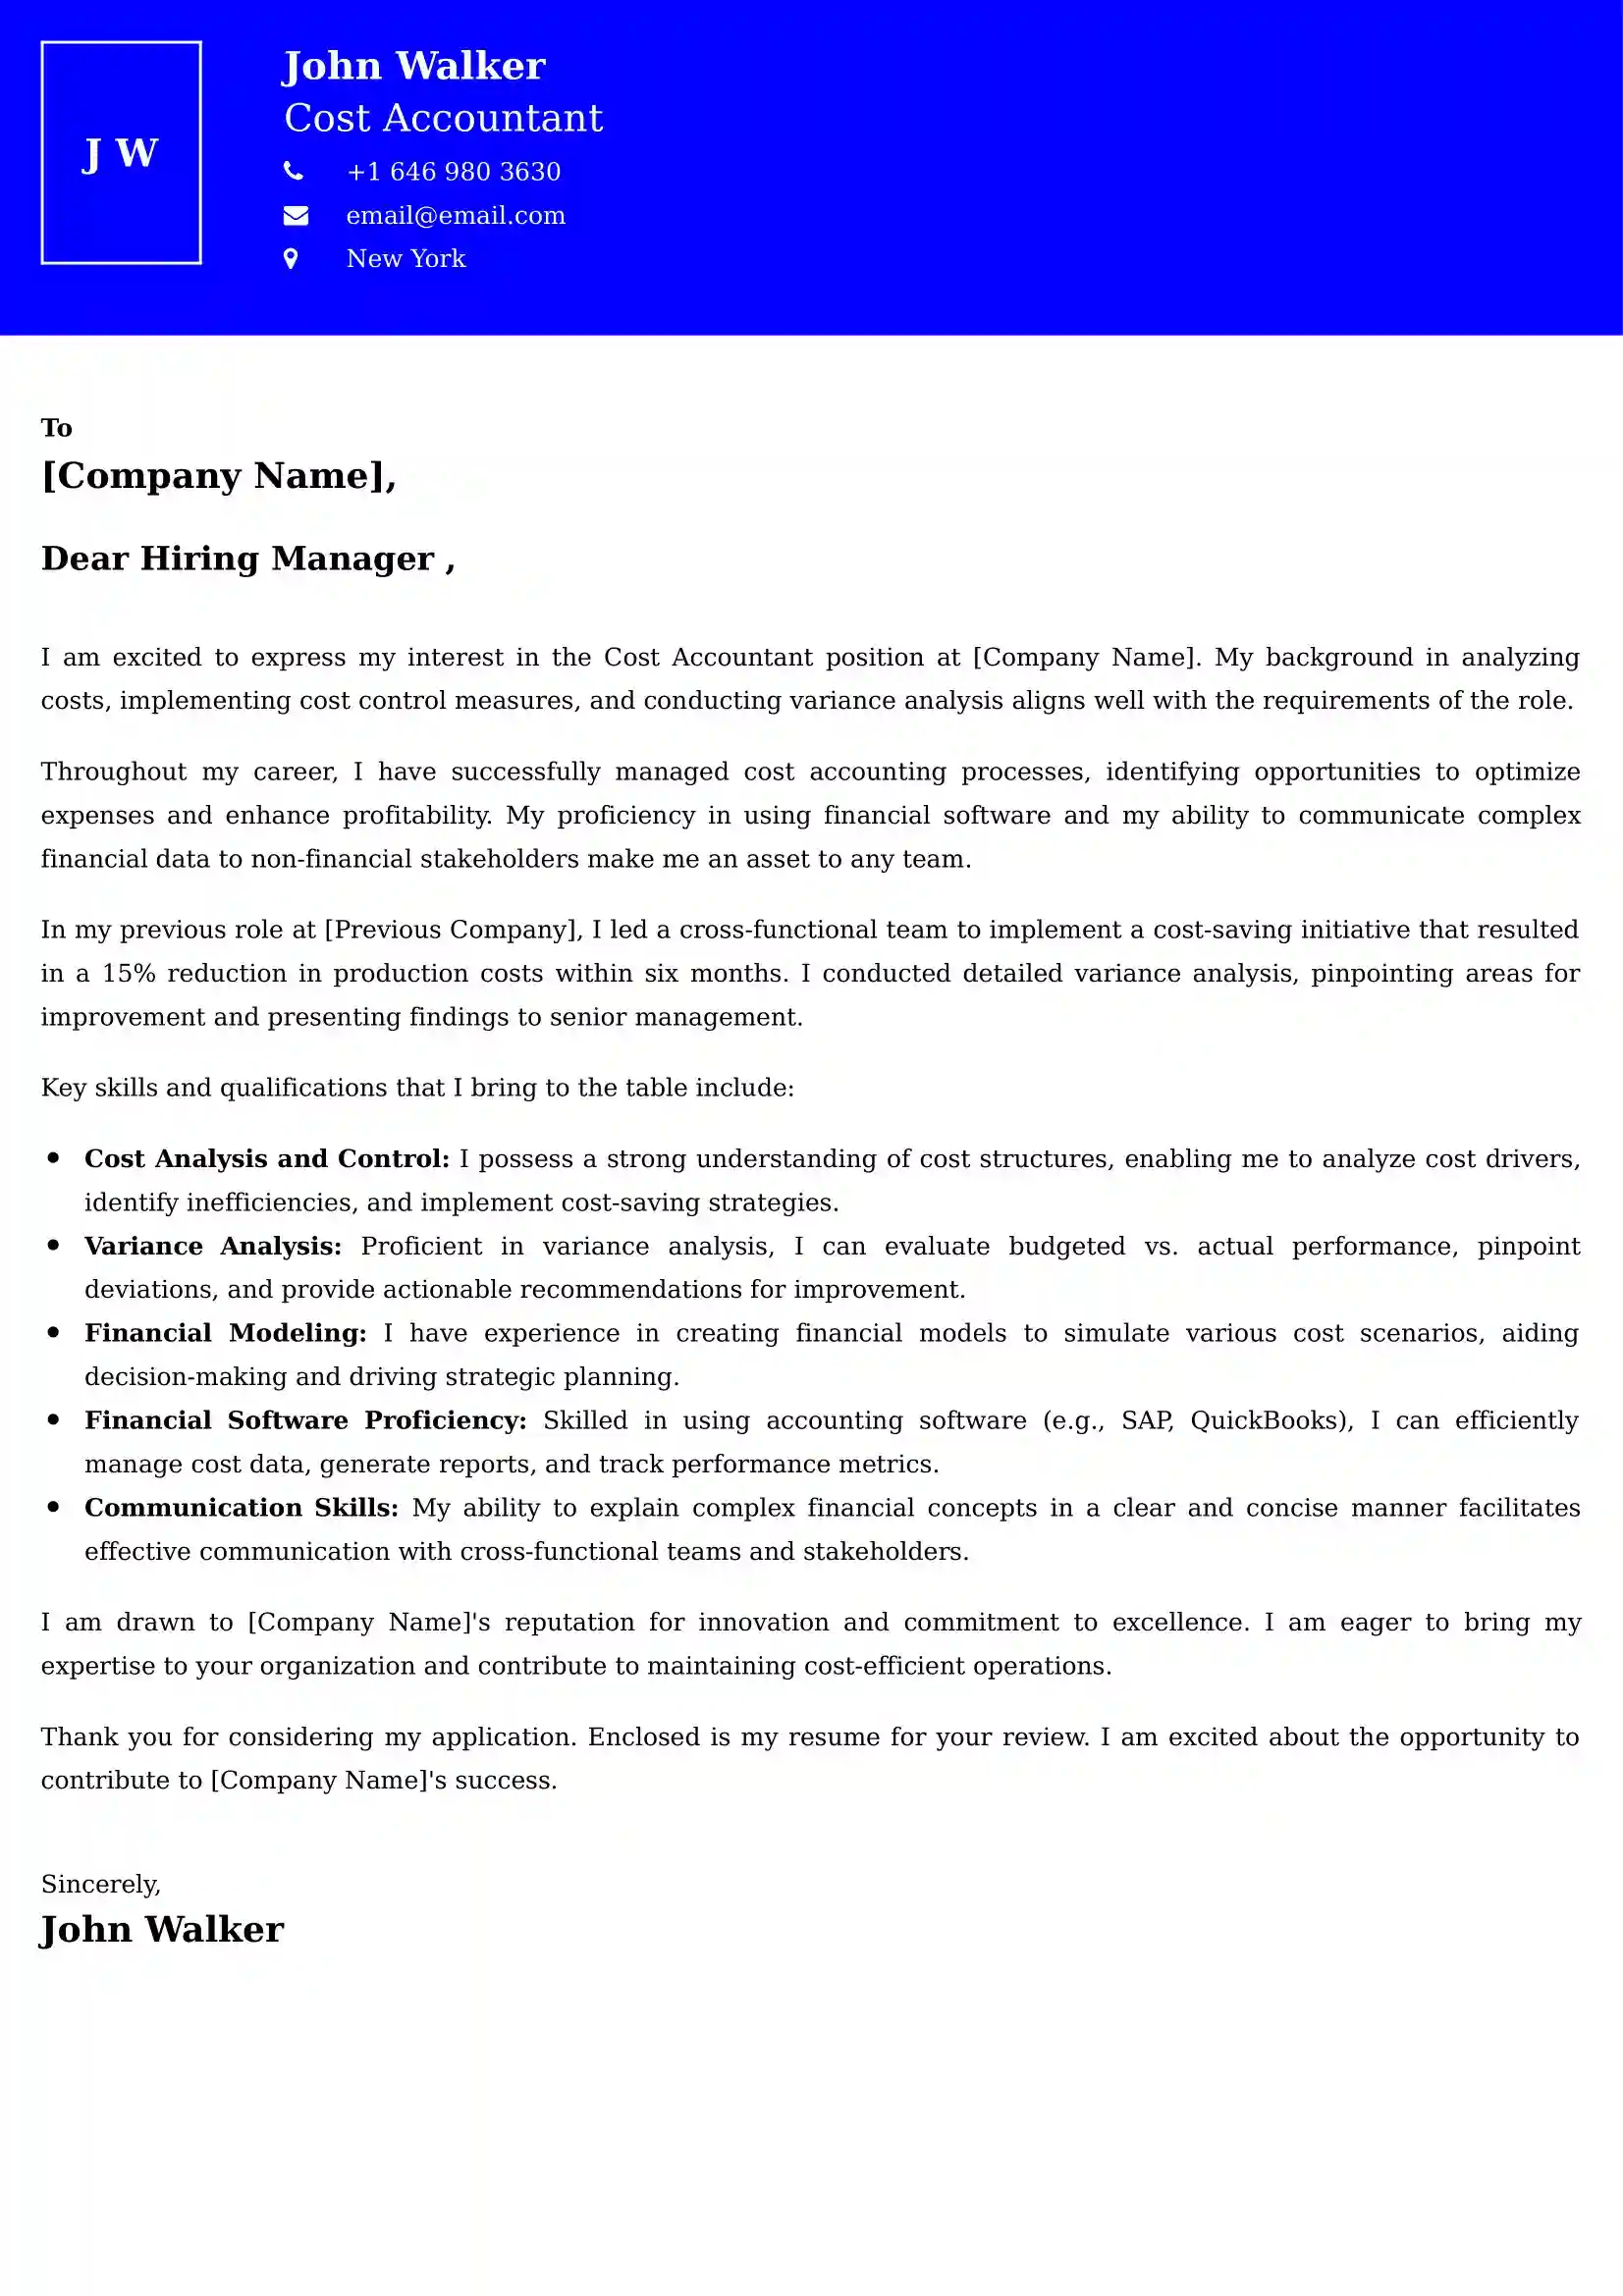 Cost Accountant Cover Letter Examples - Latest UK Format